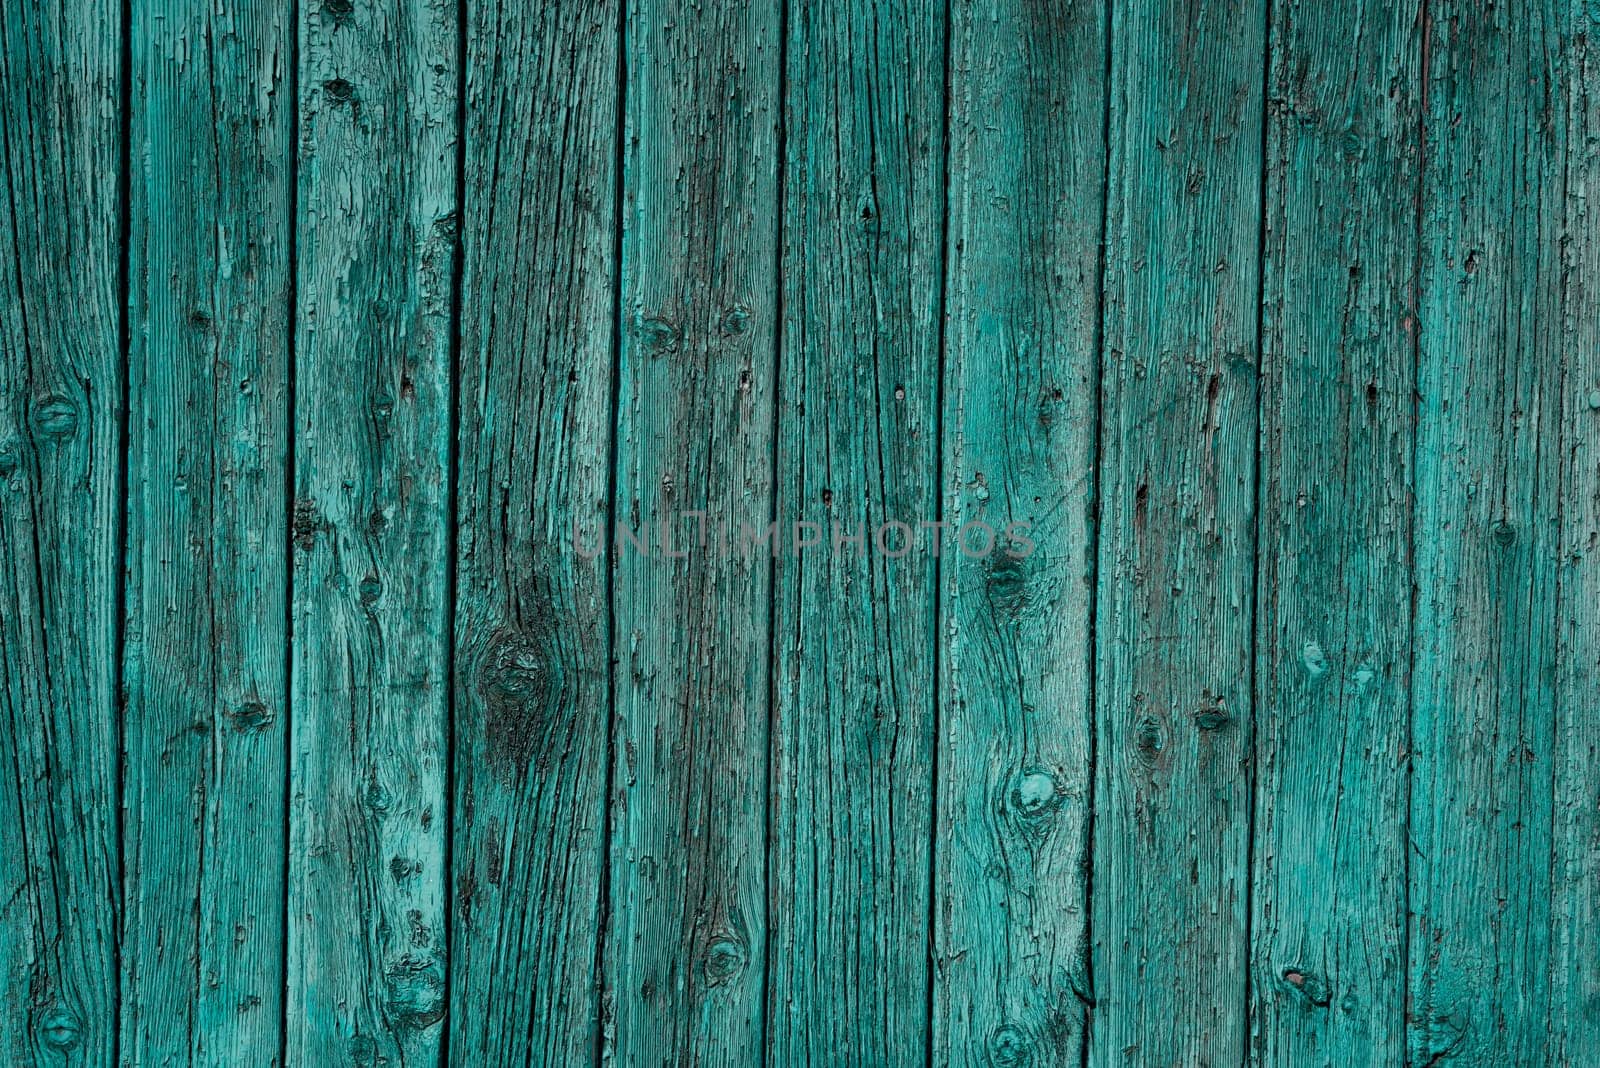 Blue wooden planks fence texture by GekaSkr